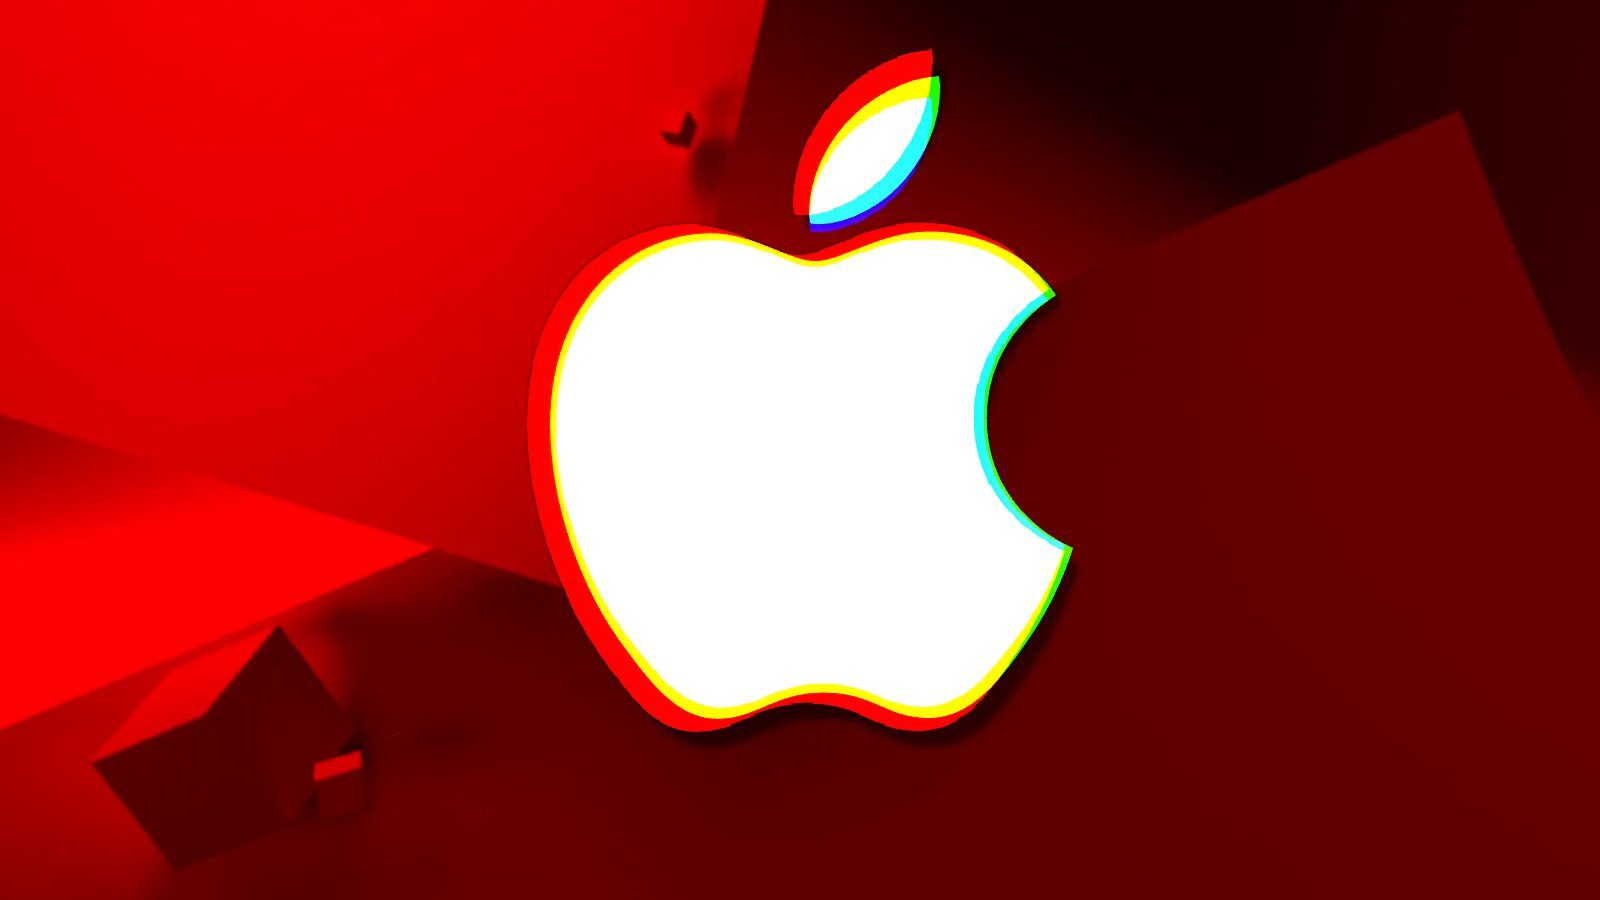 Apple’s first Rapid Security Response patch fails to install on iPhones – Source: www.bleepingcomputer.com